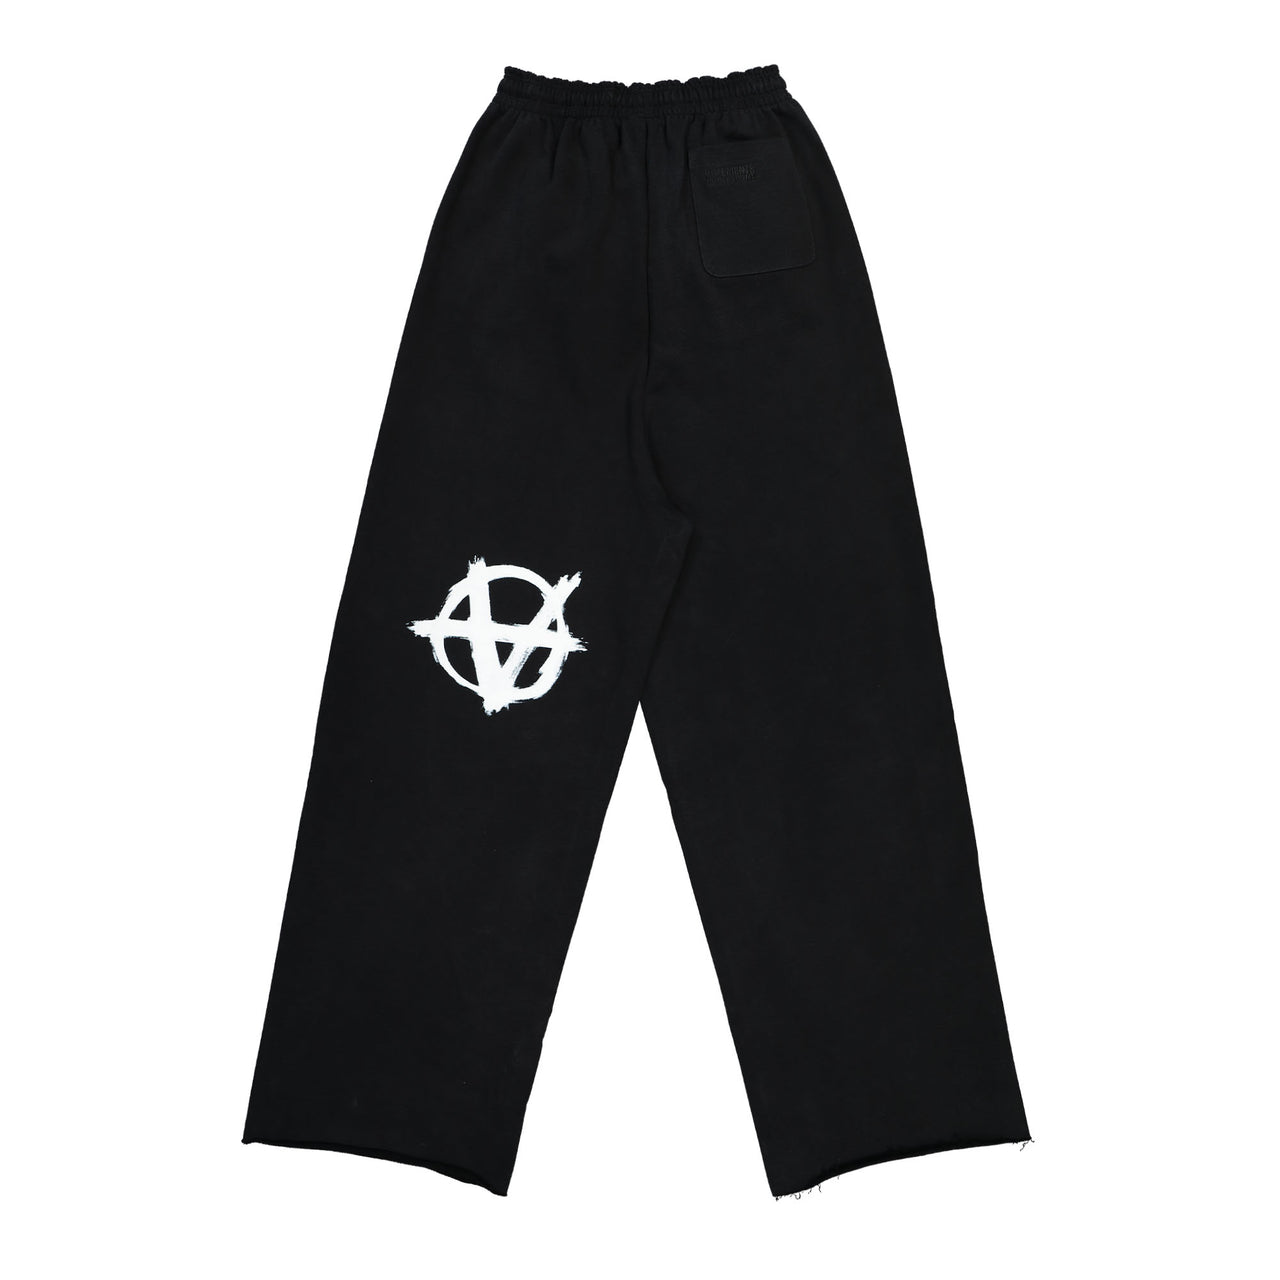 Reverse Anarchy Baggy Sweatpants